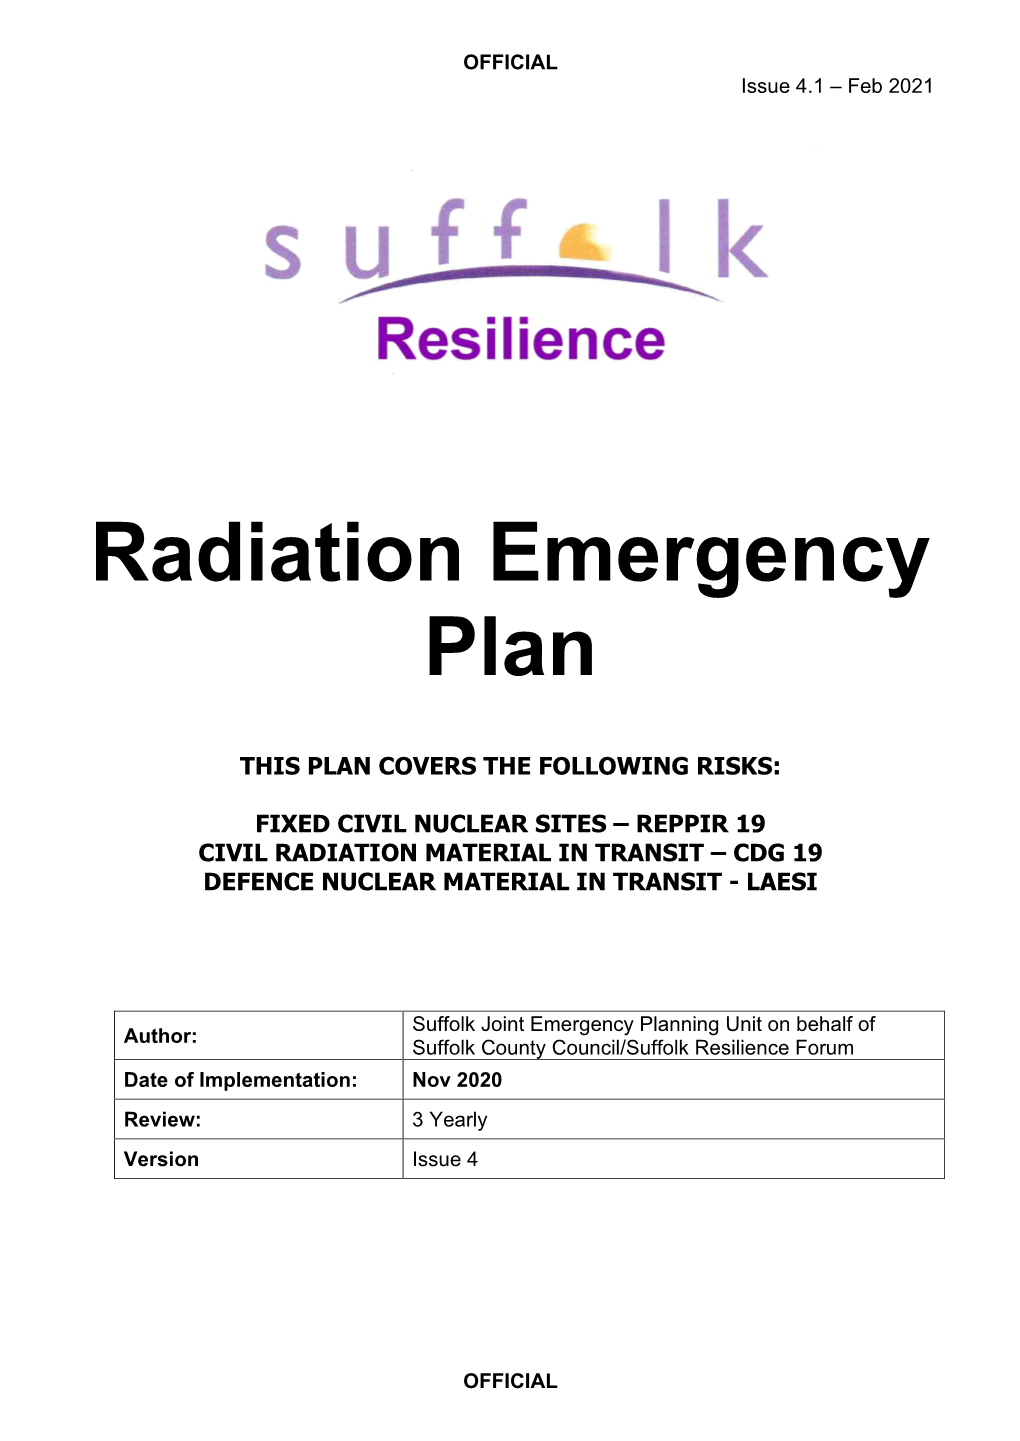 SRF Radiation Emergency Plan Iii INTRO OFFICIAL OFFICIAL Issue 4.1 – Feb 2021